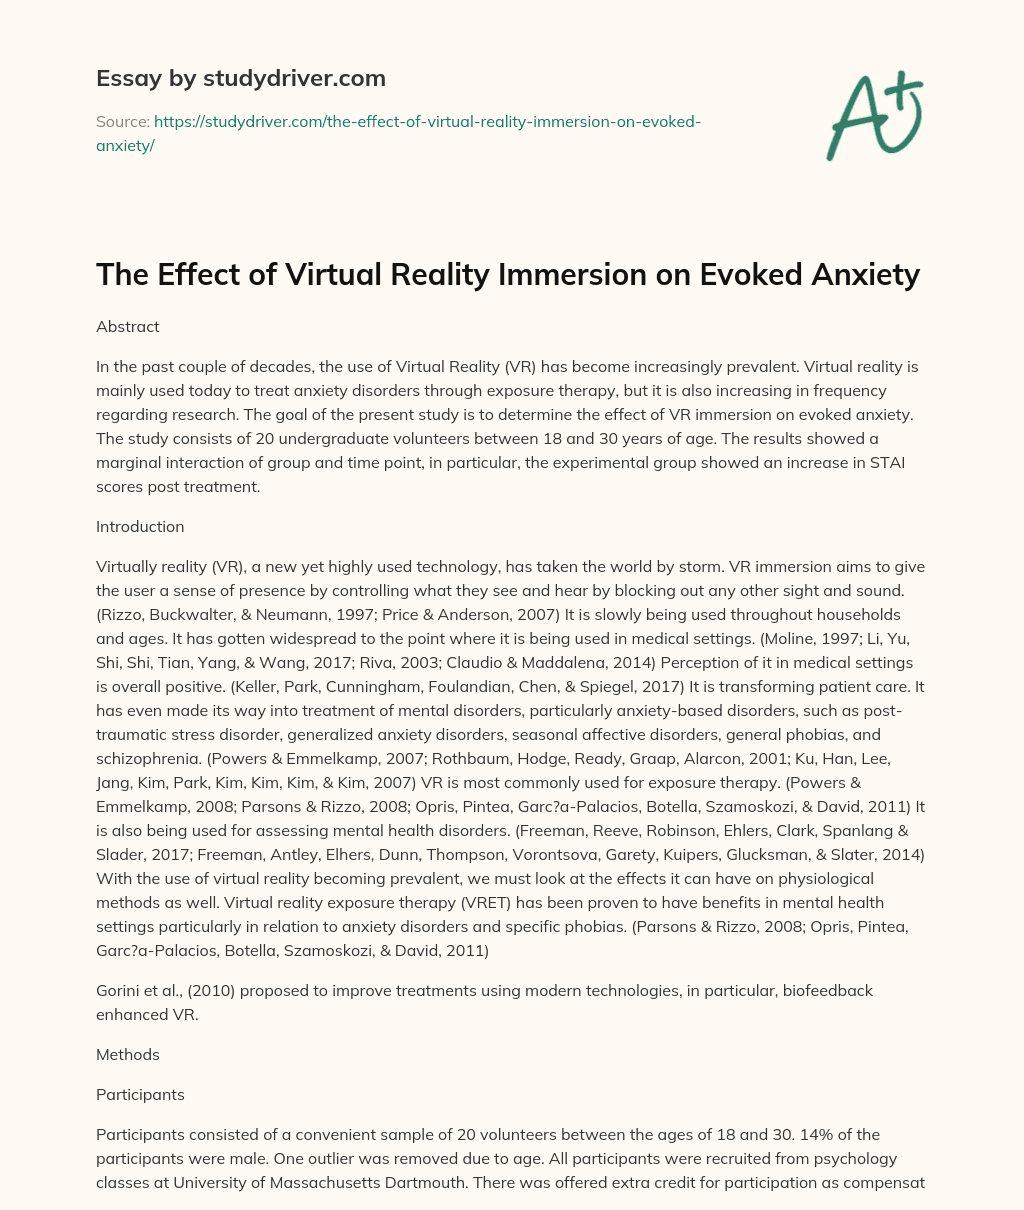 The Effect of Virtual Reality Immersion on Evoked Anxiety essay